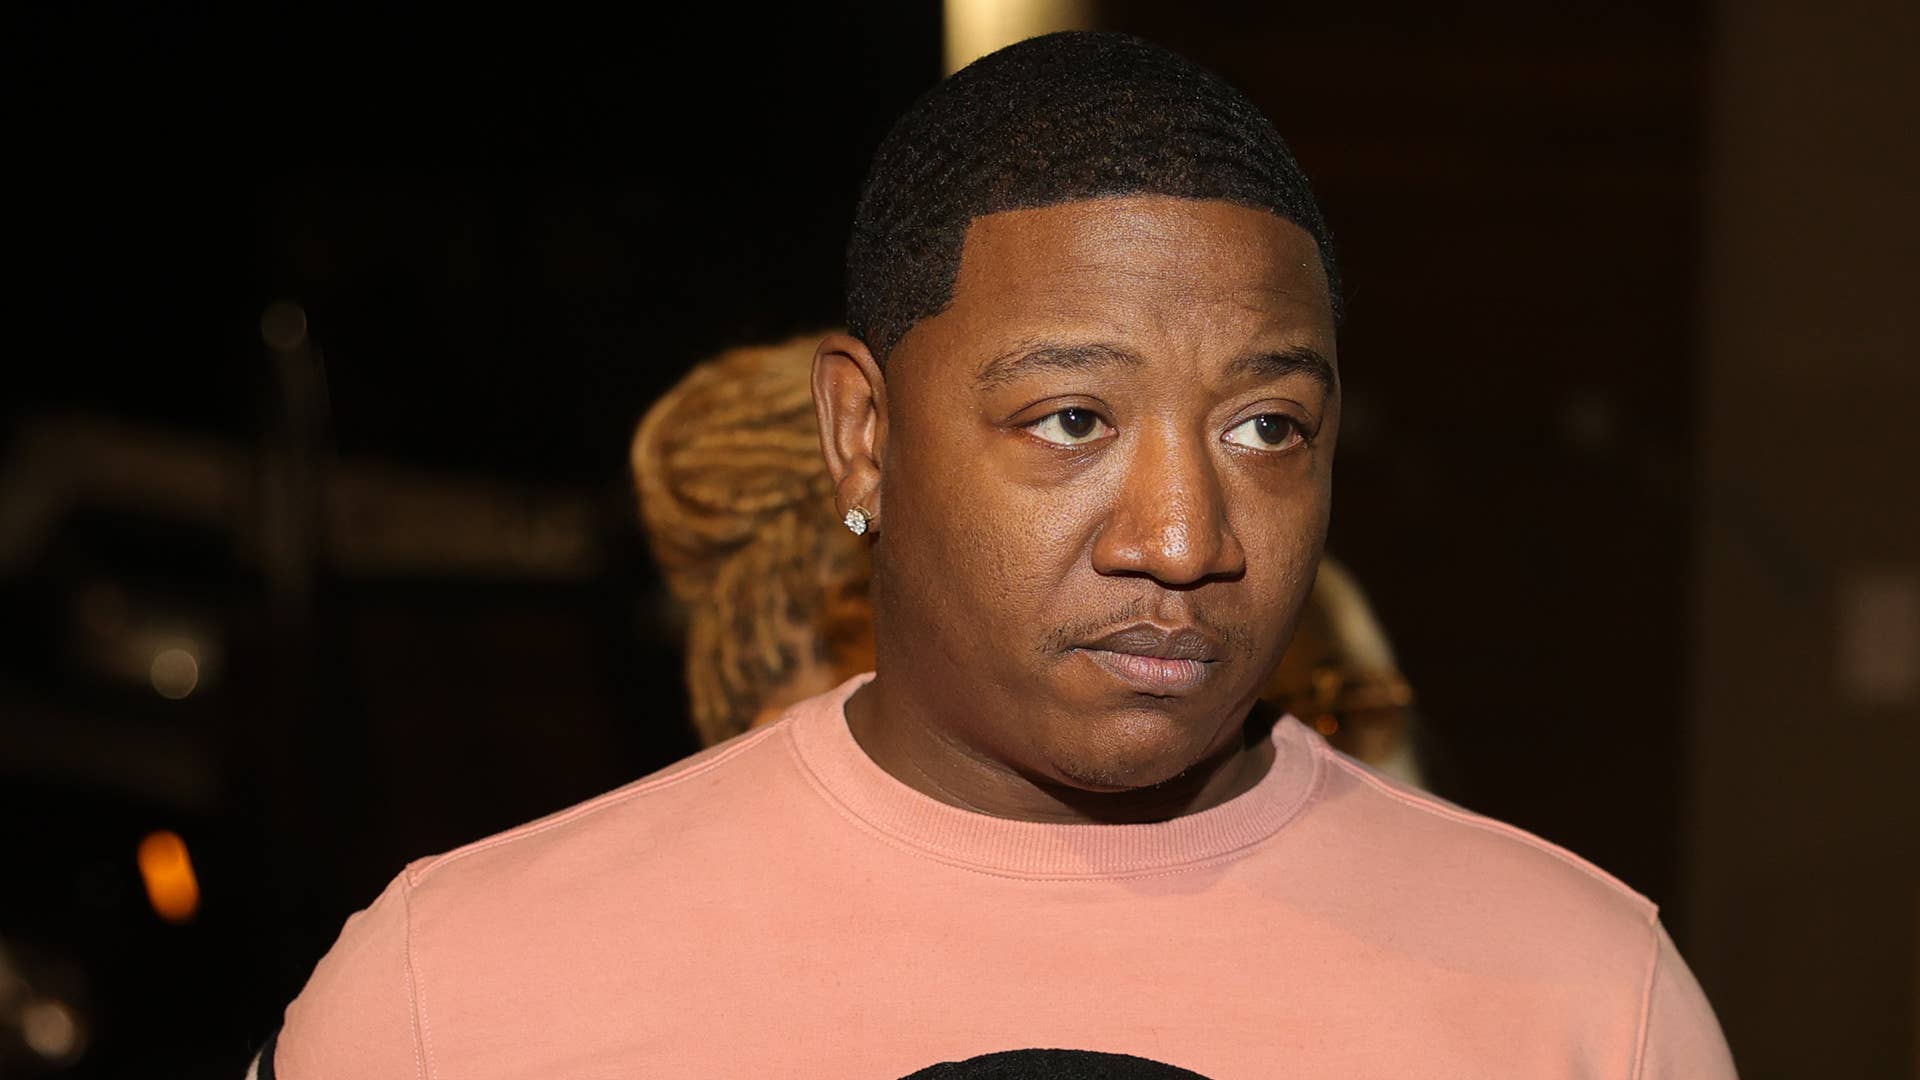 Rapper Yung Joc attends Kali Toxic Chocolate Album Release Party at Aura Lounge